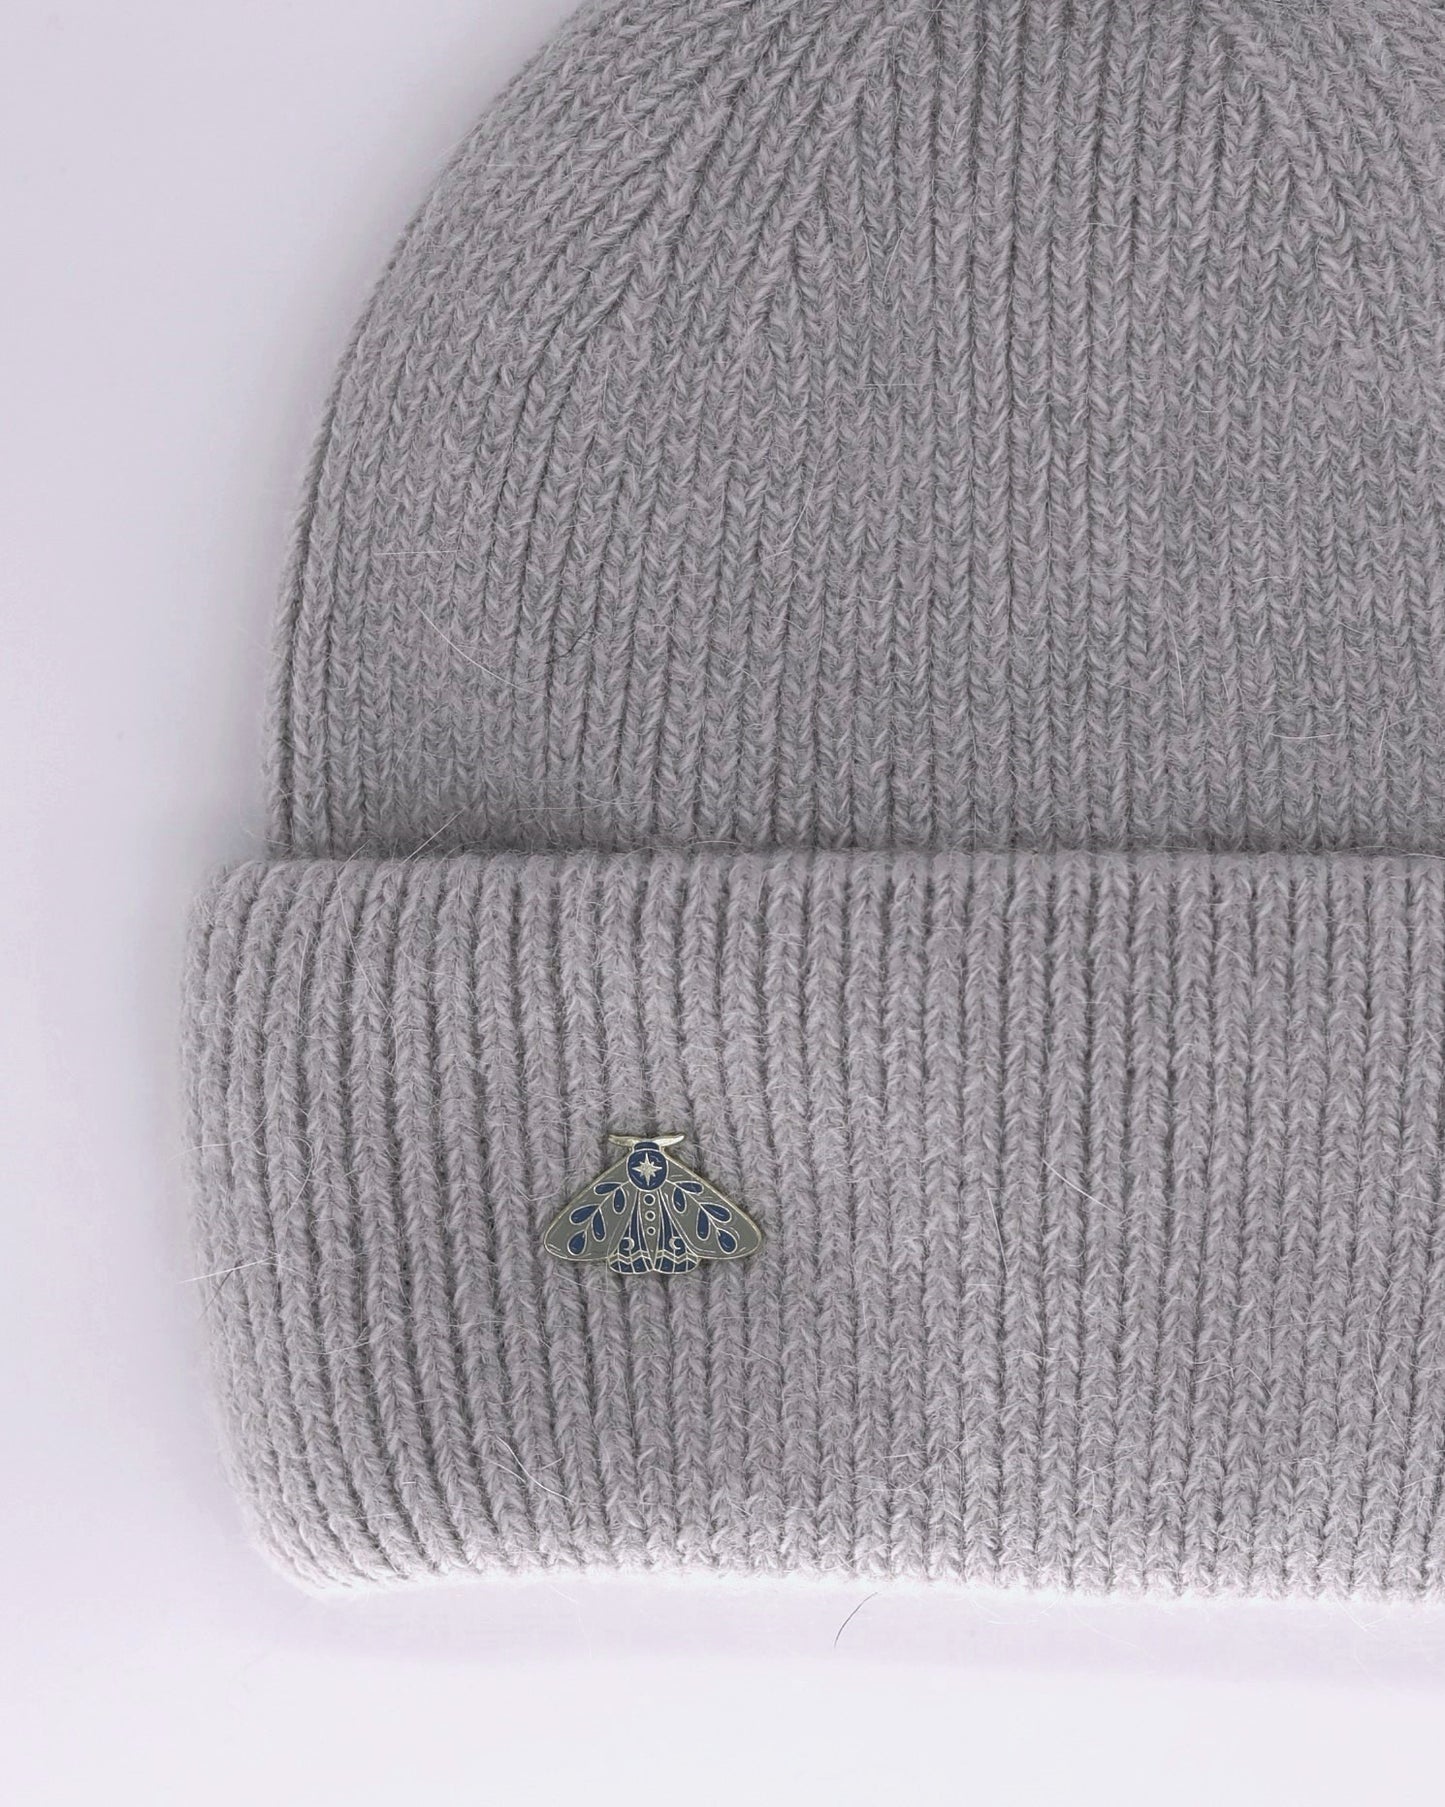 This Hat is a finest hat with a classic silhouette. A luxurious accessory for women made from the softest natural angora and sheep wool for extreme comfort and warmth. It is made in a trendy light grey color accompanied by an elegant pin. This product is sourced and manufactured in Poland.